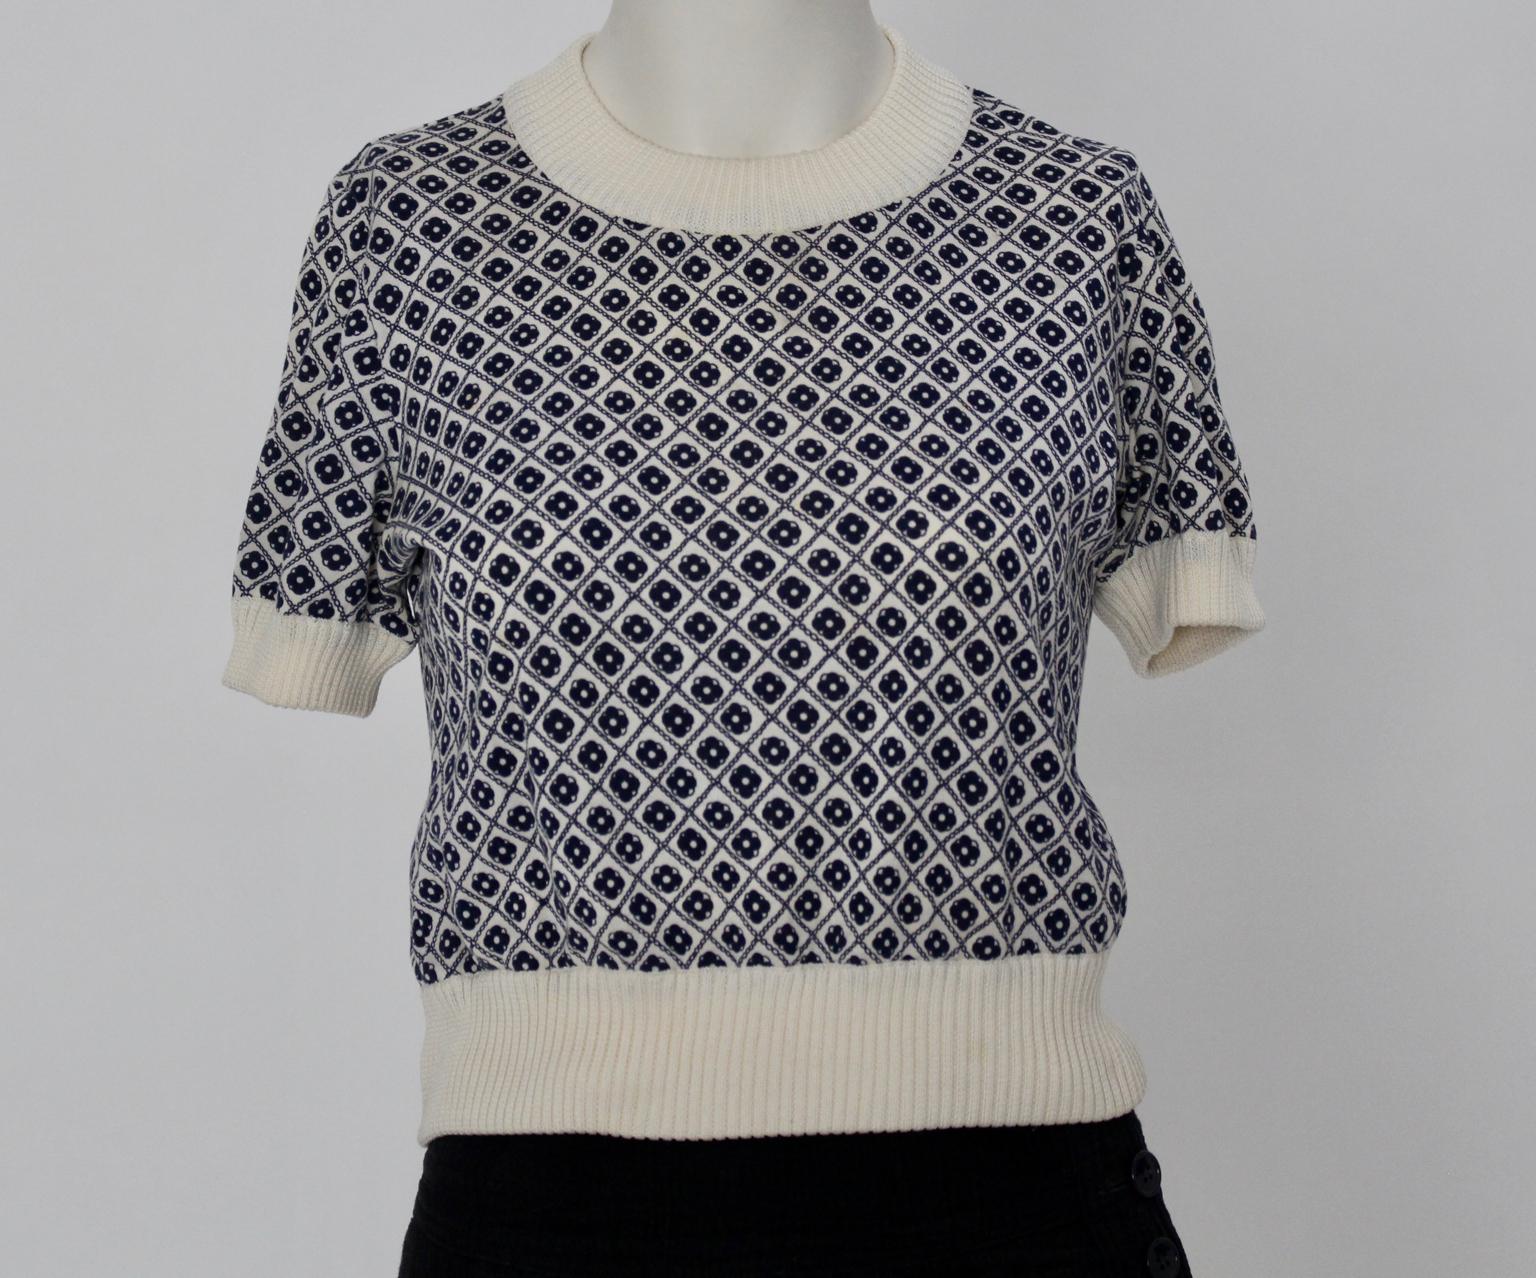 Charming blue-white patterned short-sleeve sweater with cream-white elastic ribbed cuffs at the sleeves and the hem.

Made in Italy
Size 42 ( best fit for small )
Fabric: 100 % cotton
Condition: good vintage condition

approx. measures:
Length: 47